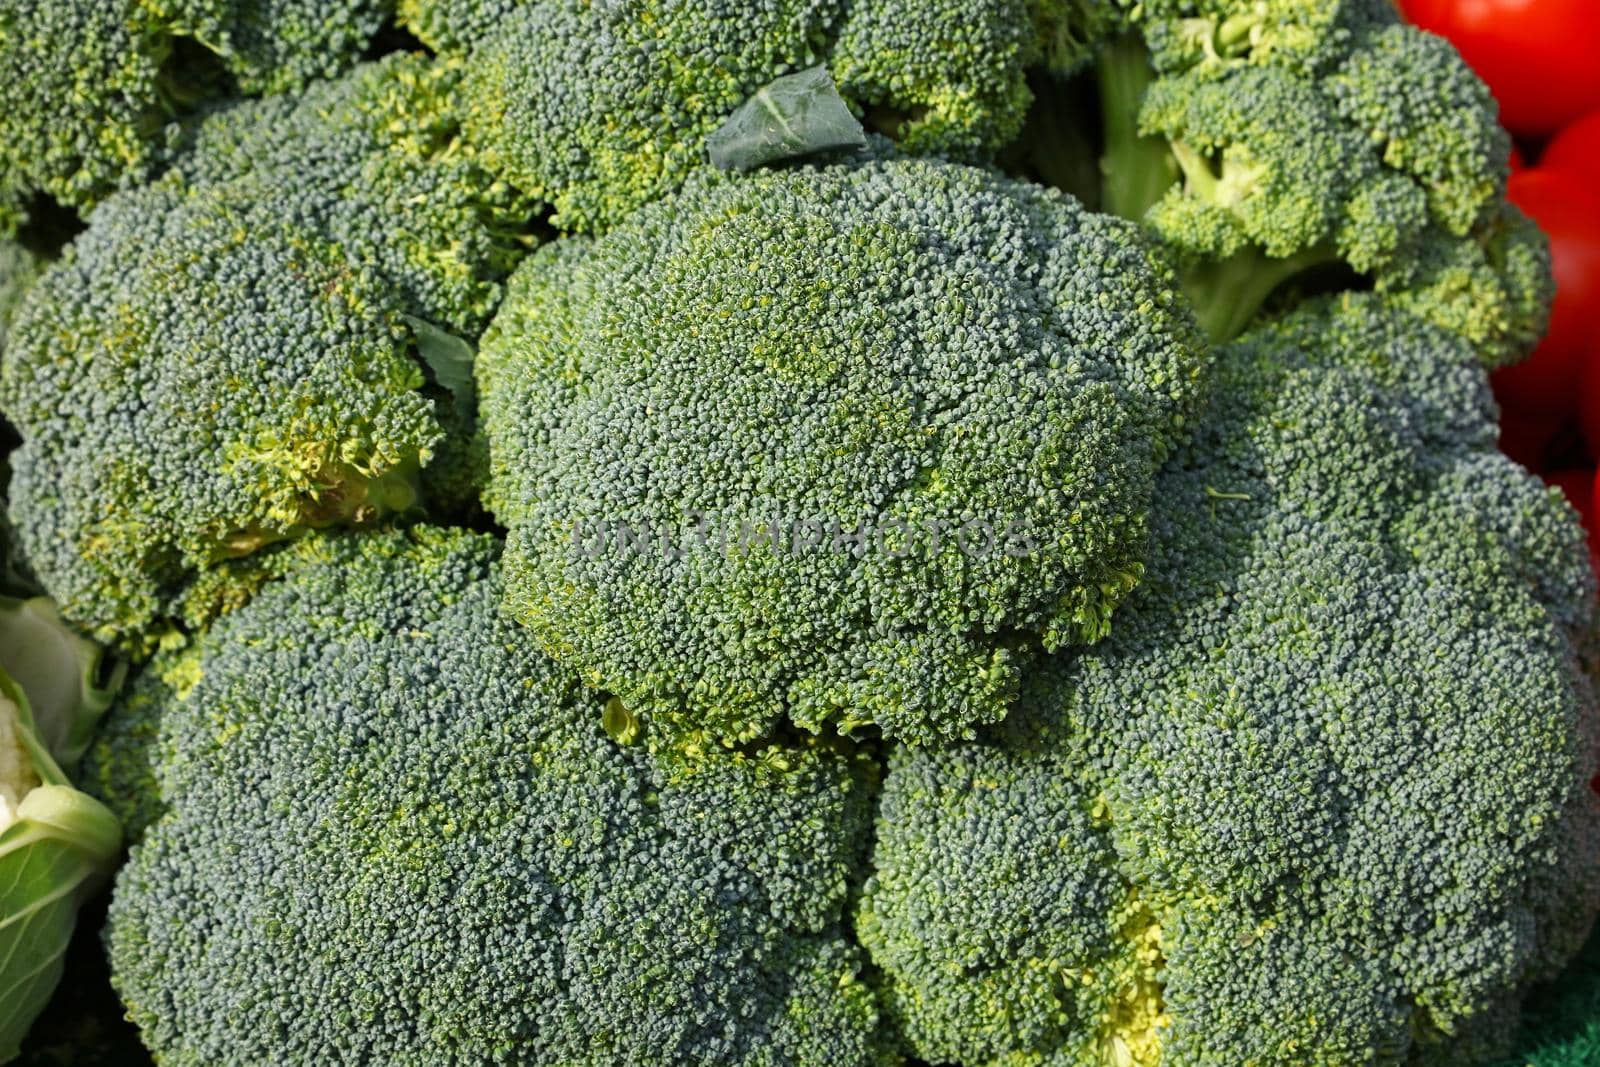 Close up many fresh green broccoli cabbages at retail display of farmer market, high angle view